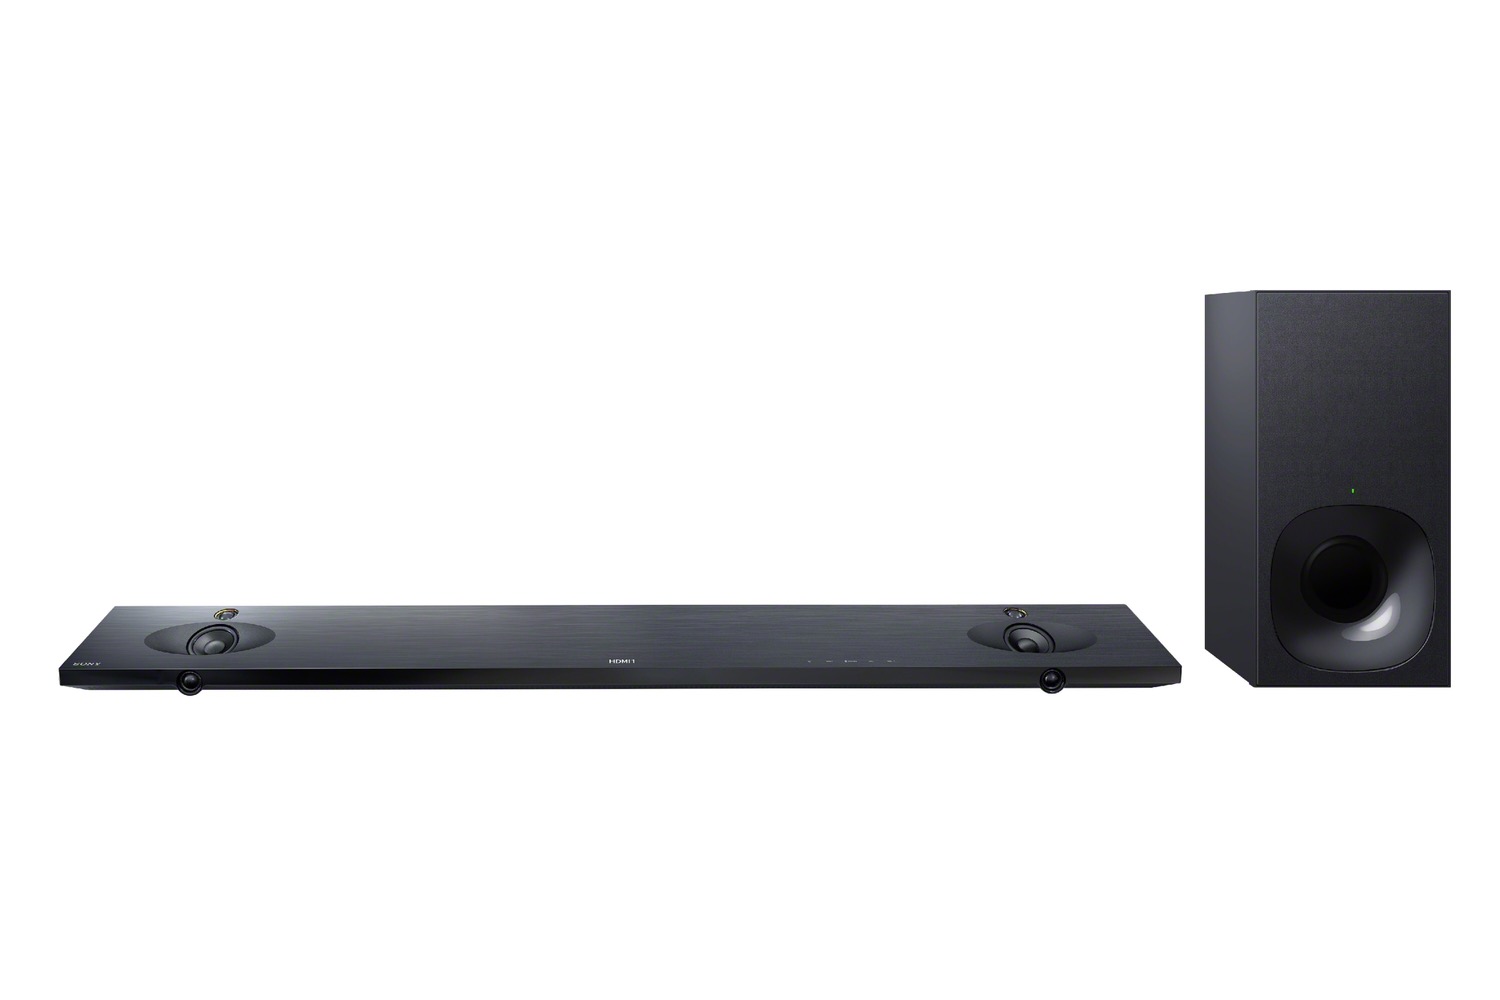 sony unveils new high res multiroom audio gear ht nt5